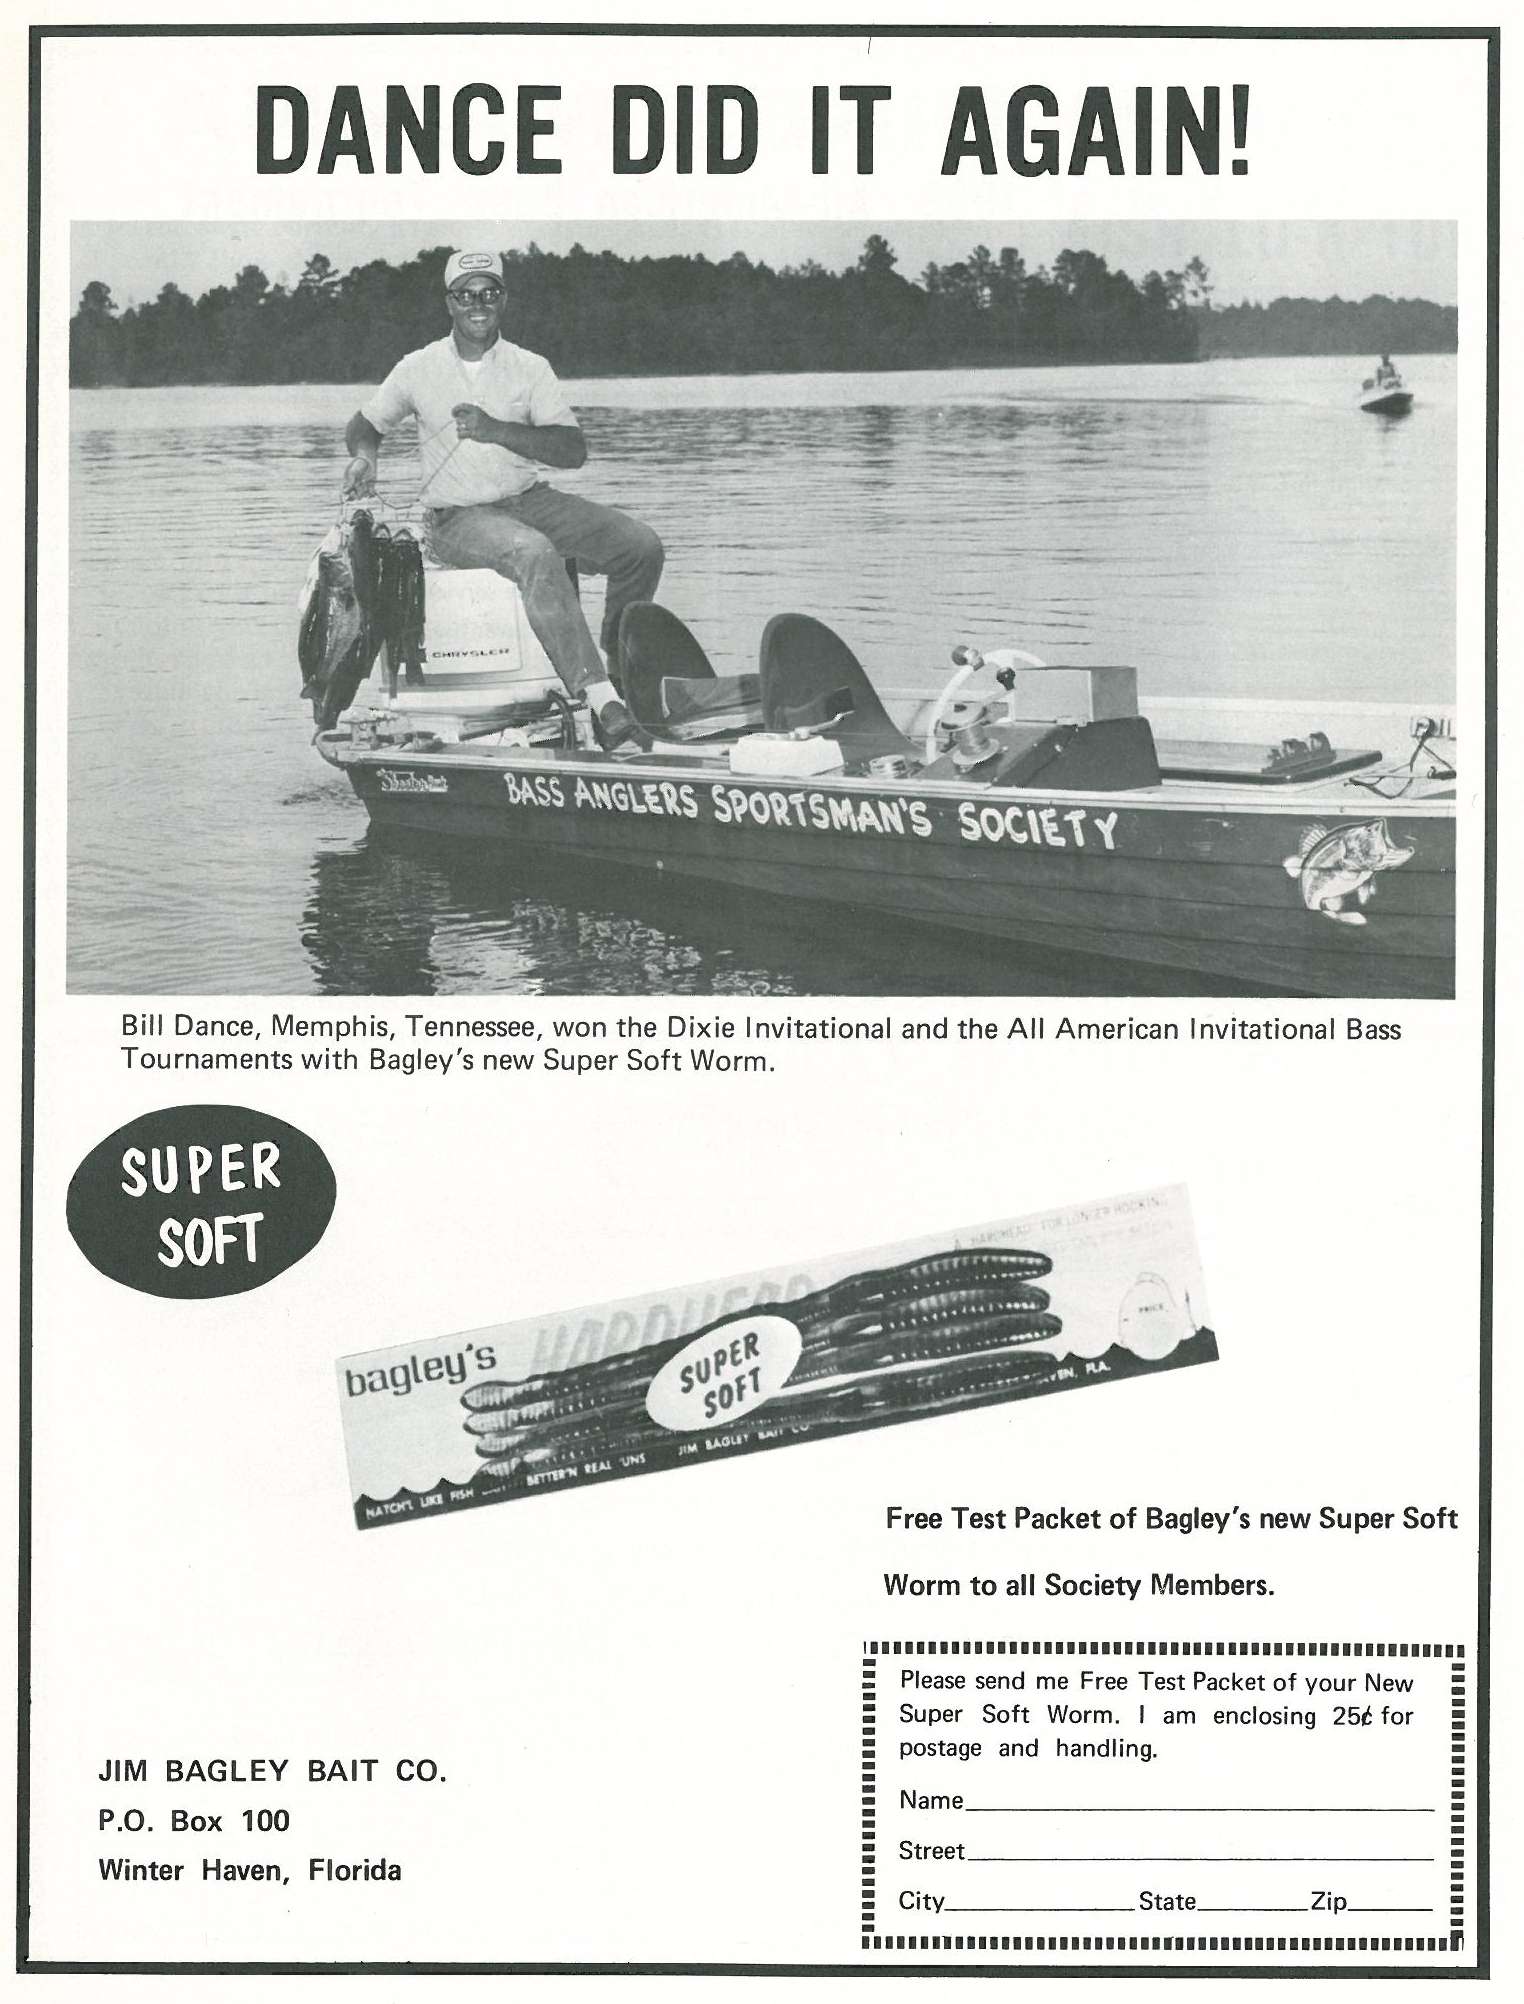 Bill Dance appears for Jim Bagley Bait Co. His boat features hand lettering and graphics.